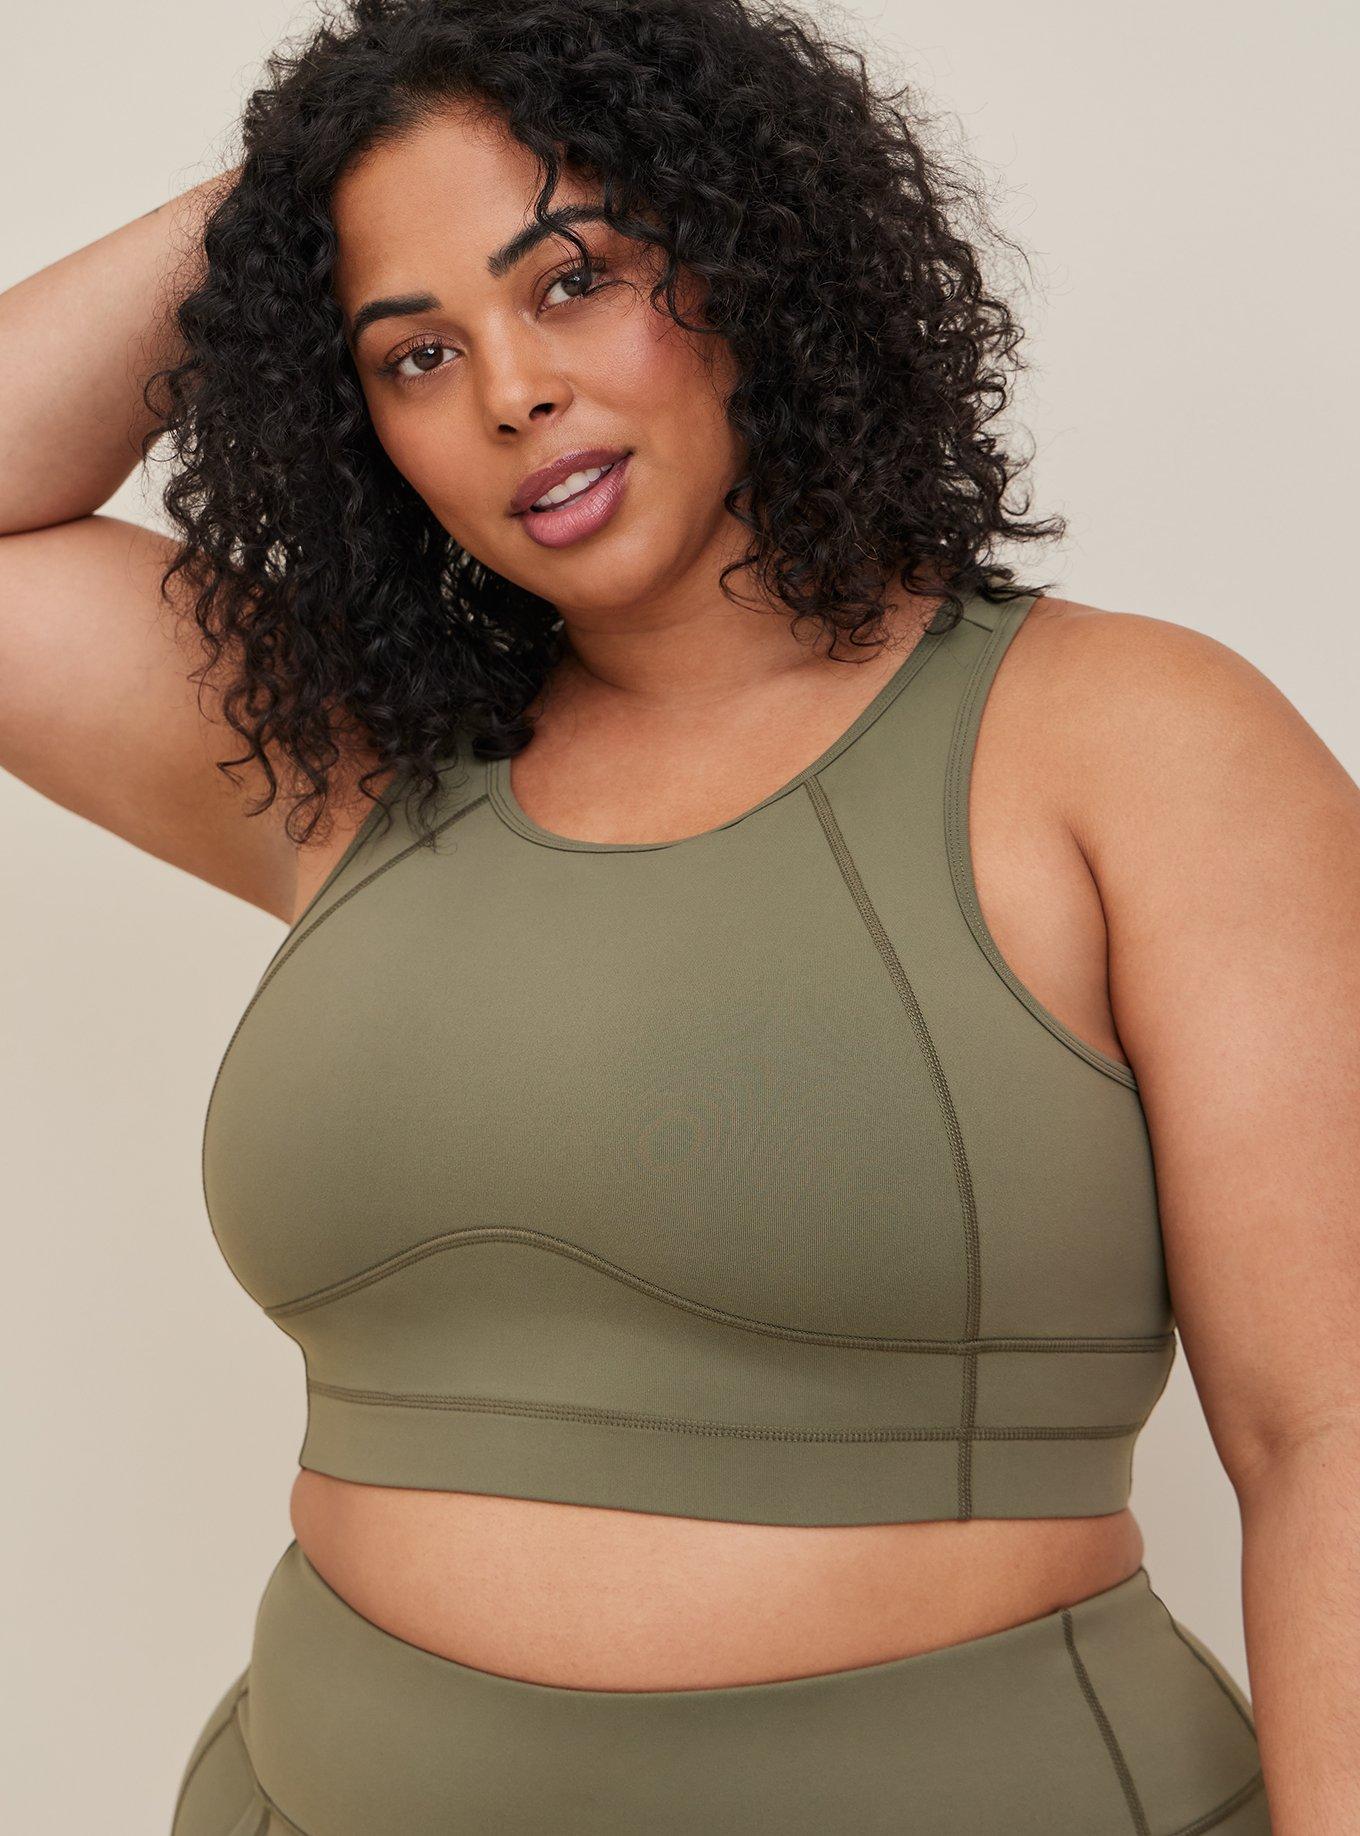 Torrid bras - message about pricing (1- $35